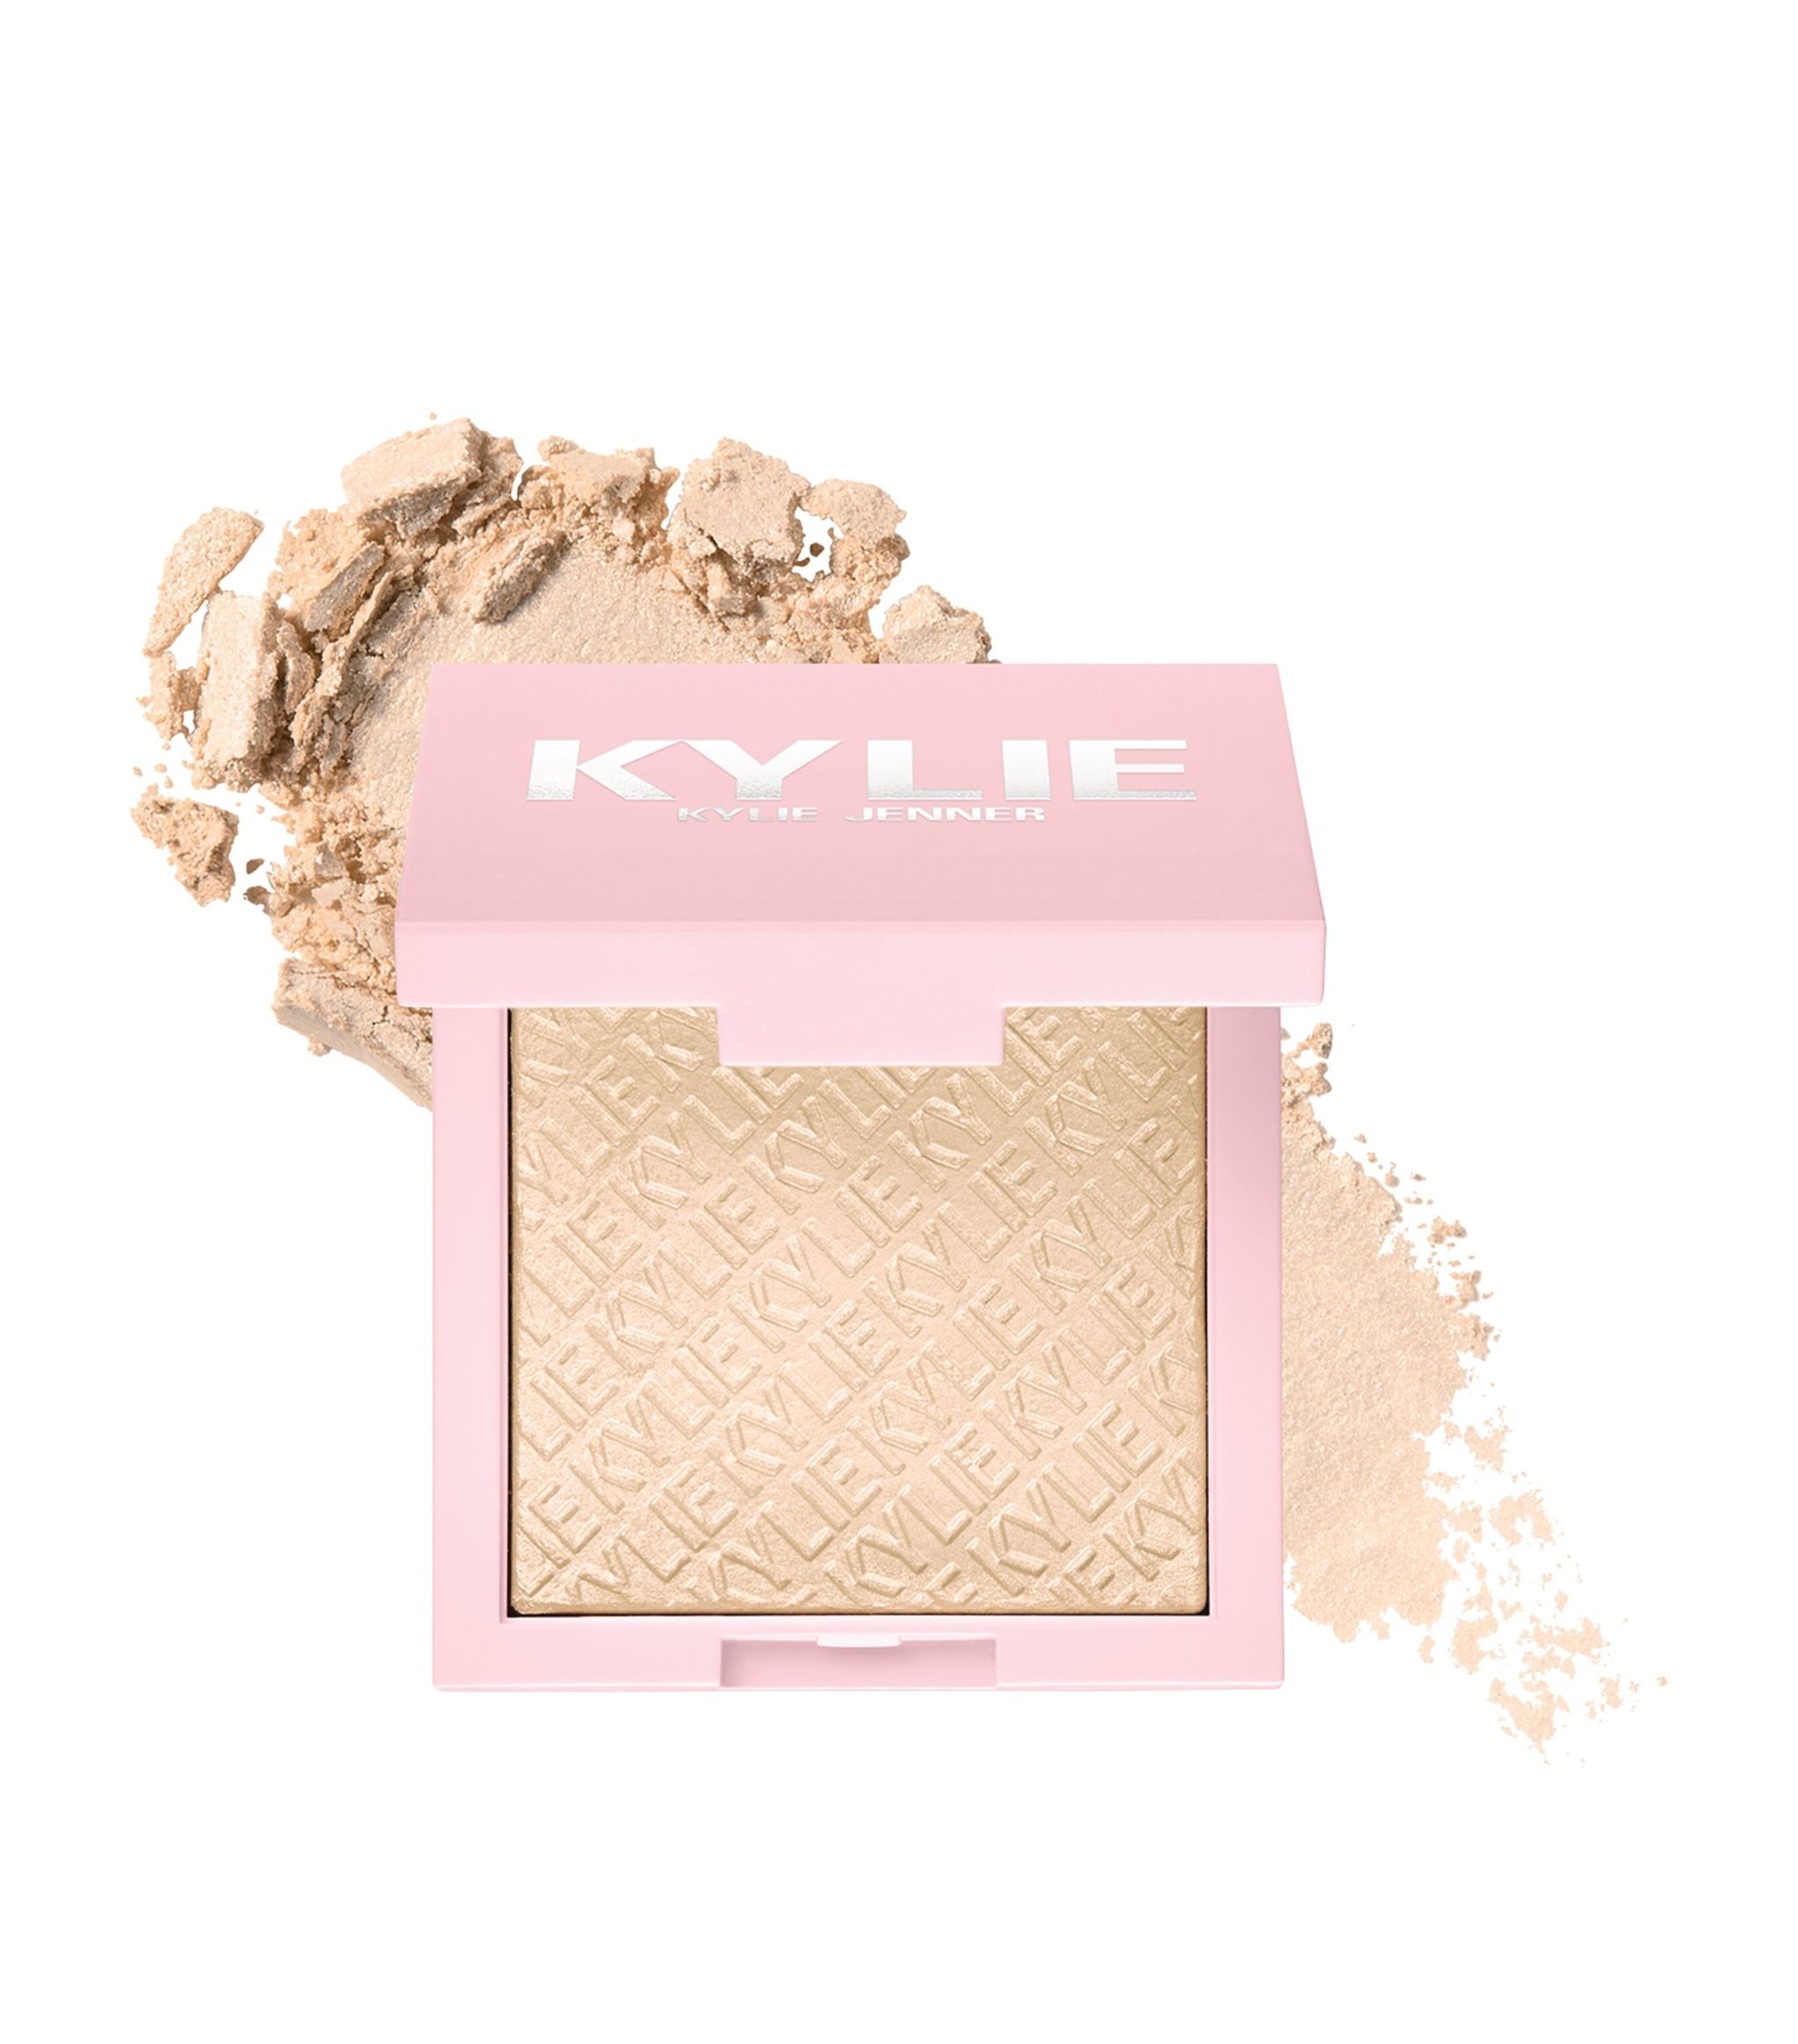 Kylie Cosmetics Kylighter Illuminating Powder in Ice Me Out